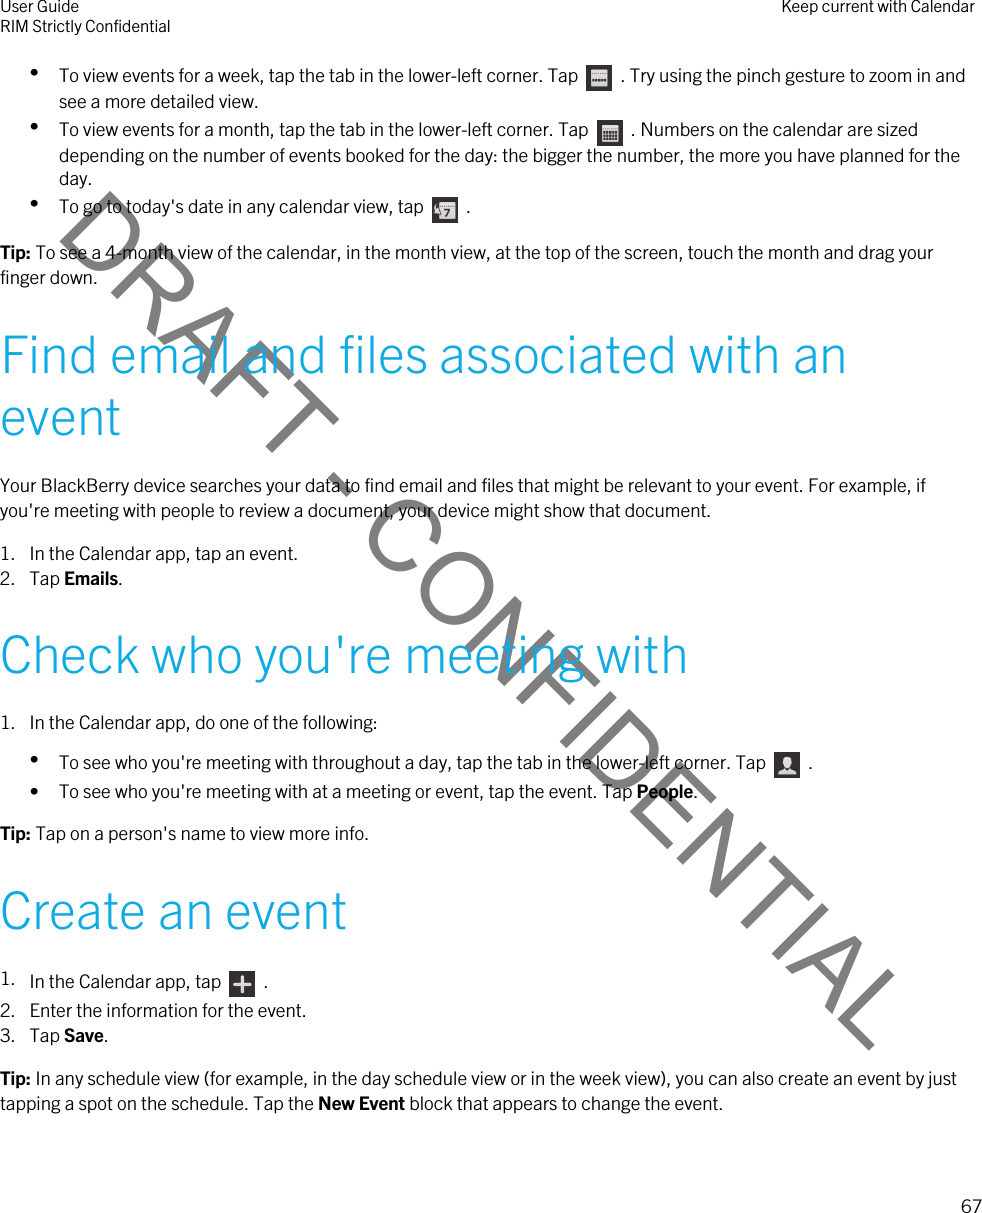 DRAFT - CONFIDENTIAL•To view events for a week, tap the tab in the lower-left corner. Tap    . Try using the pinch gesture to zoom in and see a more detailed view.•To view events for a month, tap the tab in the lower-left corner. Tap    . Numbers on the calendar are sized depending on the number of events booked for the day: the bigger the number, the more you have planned for the day.•To go to today&apos;s date in any calendar view, tap    .Tip: To see a 4-month view of the calendar, in the month view, at the top of the screen, touch the month and drag your finger down.Find email and files associated with an eventYour BlackBerry device searches your data to find email and files that might be relevant to your event. For example, if you&apos;re meeting with people to review a document, your device might show that document.1. In the Calendar app, tap an event.2. Tap Emails.Check who you&apos;re meeting with1. In the Calendar app, do one of the following:•To see who you&apos;re meeting with throughout a day, tap the tab in the lower-left corner. Tap    .• To see who you&apos;re meeting with at a meeting or event, tap the event. Tap People.Tip: Tap on a person&apos;s name to view more info.Create an event1. In the Calendar app, tap    .2. Enter the information for the event.3. Tap Save.Tip: In any schedule view (for example, in the day schedule view or in the week view), you can also create an event by just tapping a spot on the schedule. Tap the New Event block that appears to change the event.User GuideRIM Strictly Confidential Keep current with Calendar67 